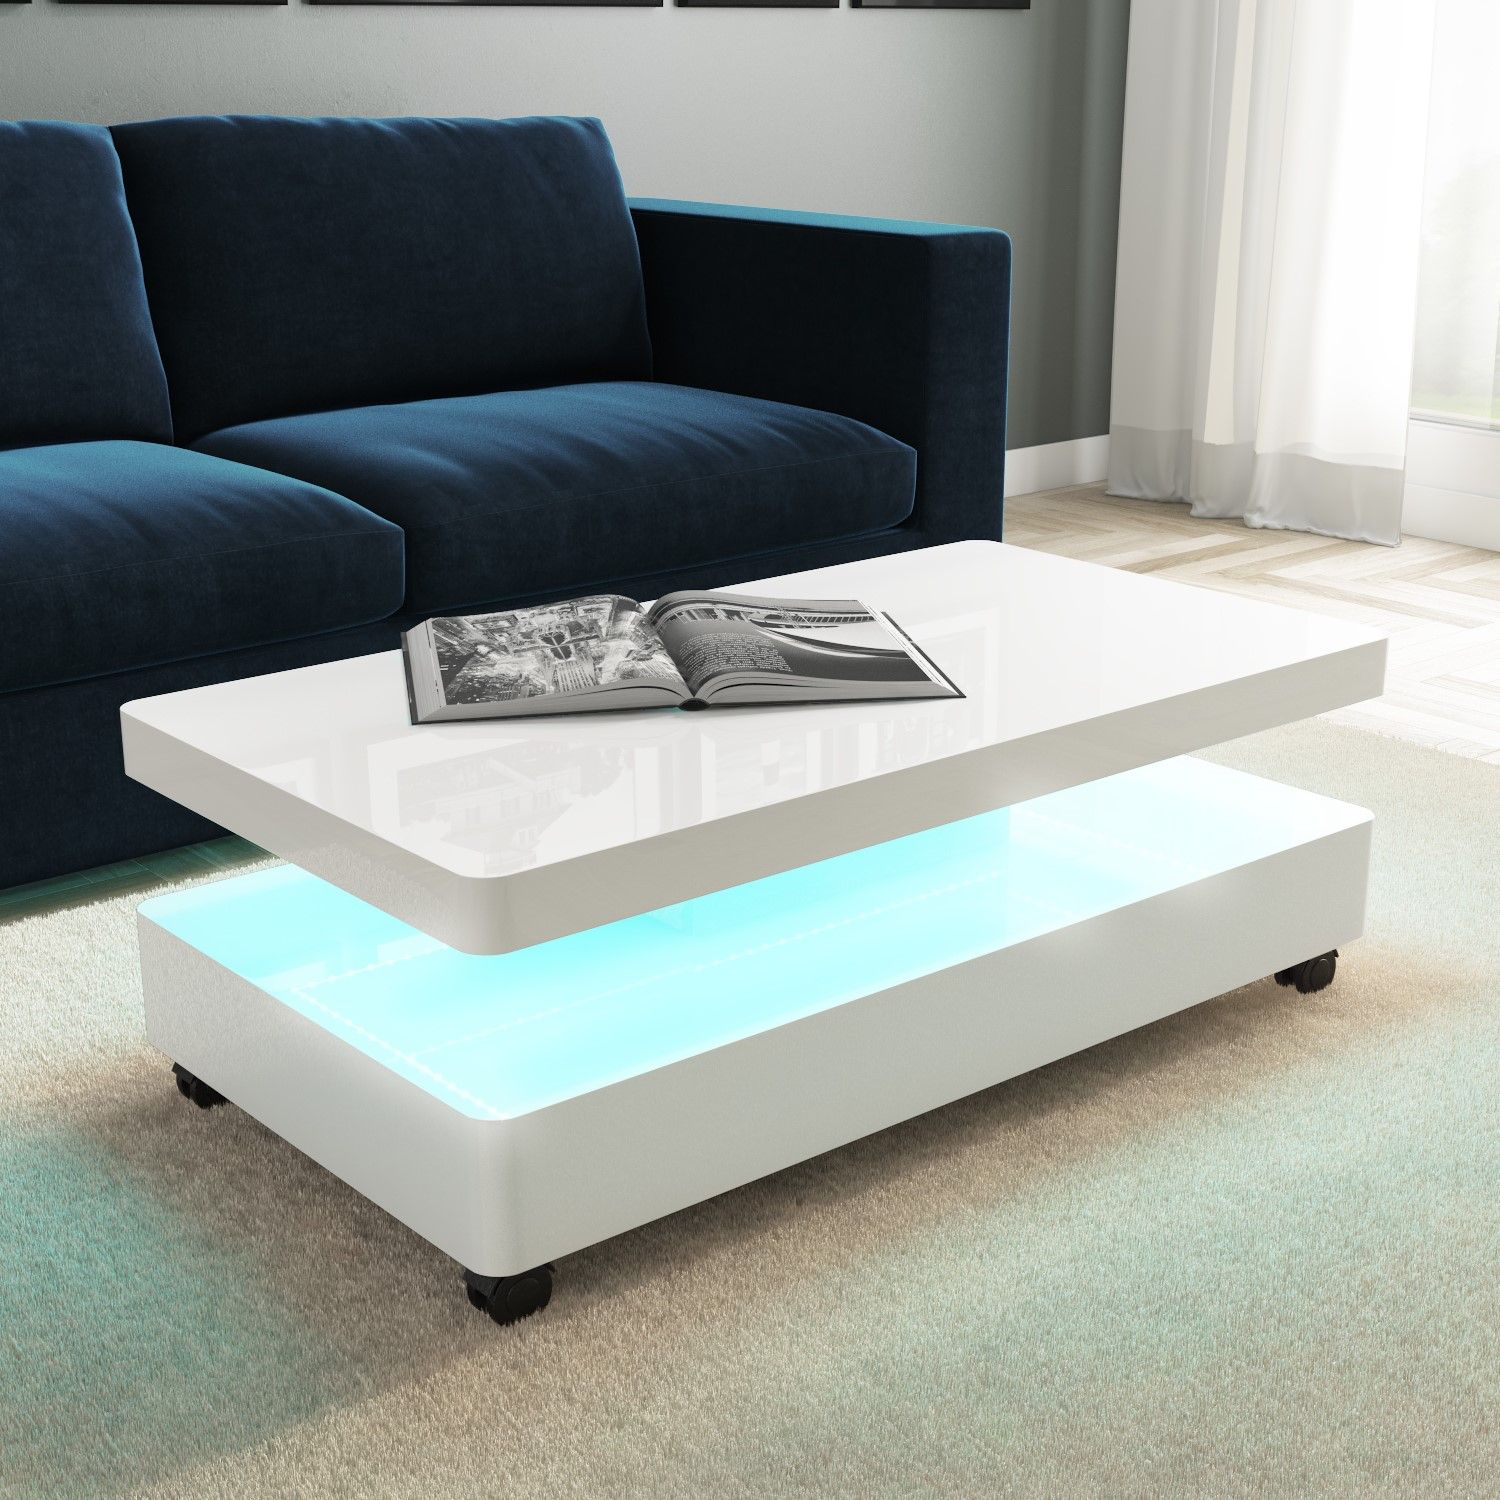 High Gloss White Coffee Table With Led Lighting 5060388562168 | Ebay Inside Coffee Tables With Drawers And Led Lights (Gallery 8 of 20)